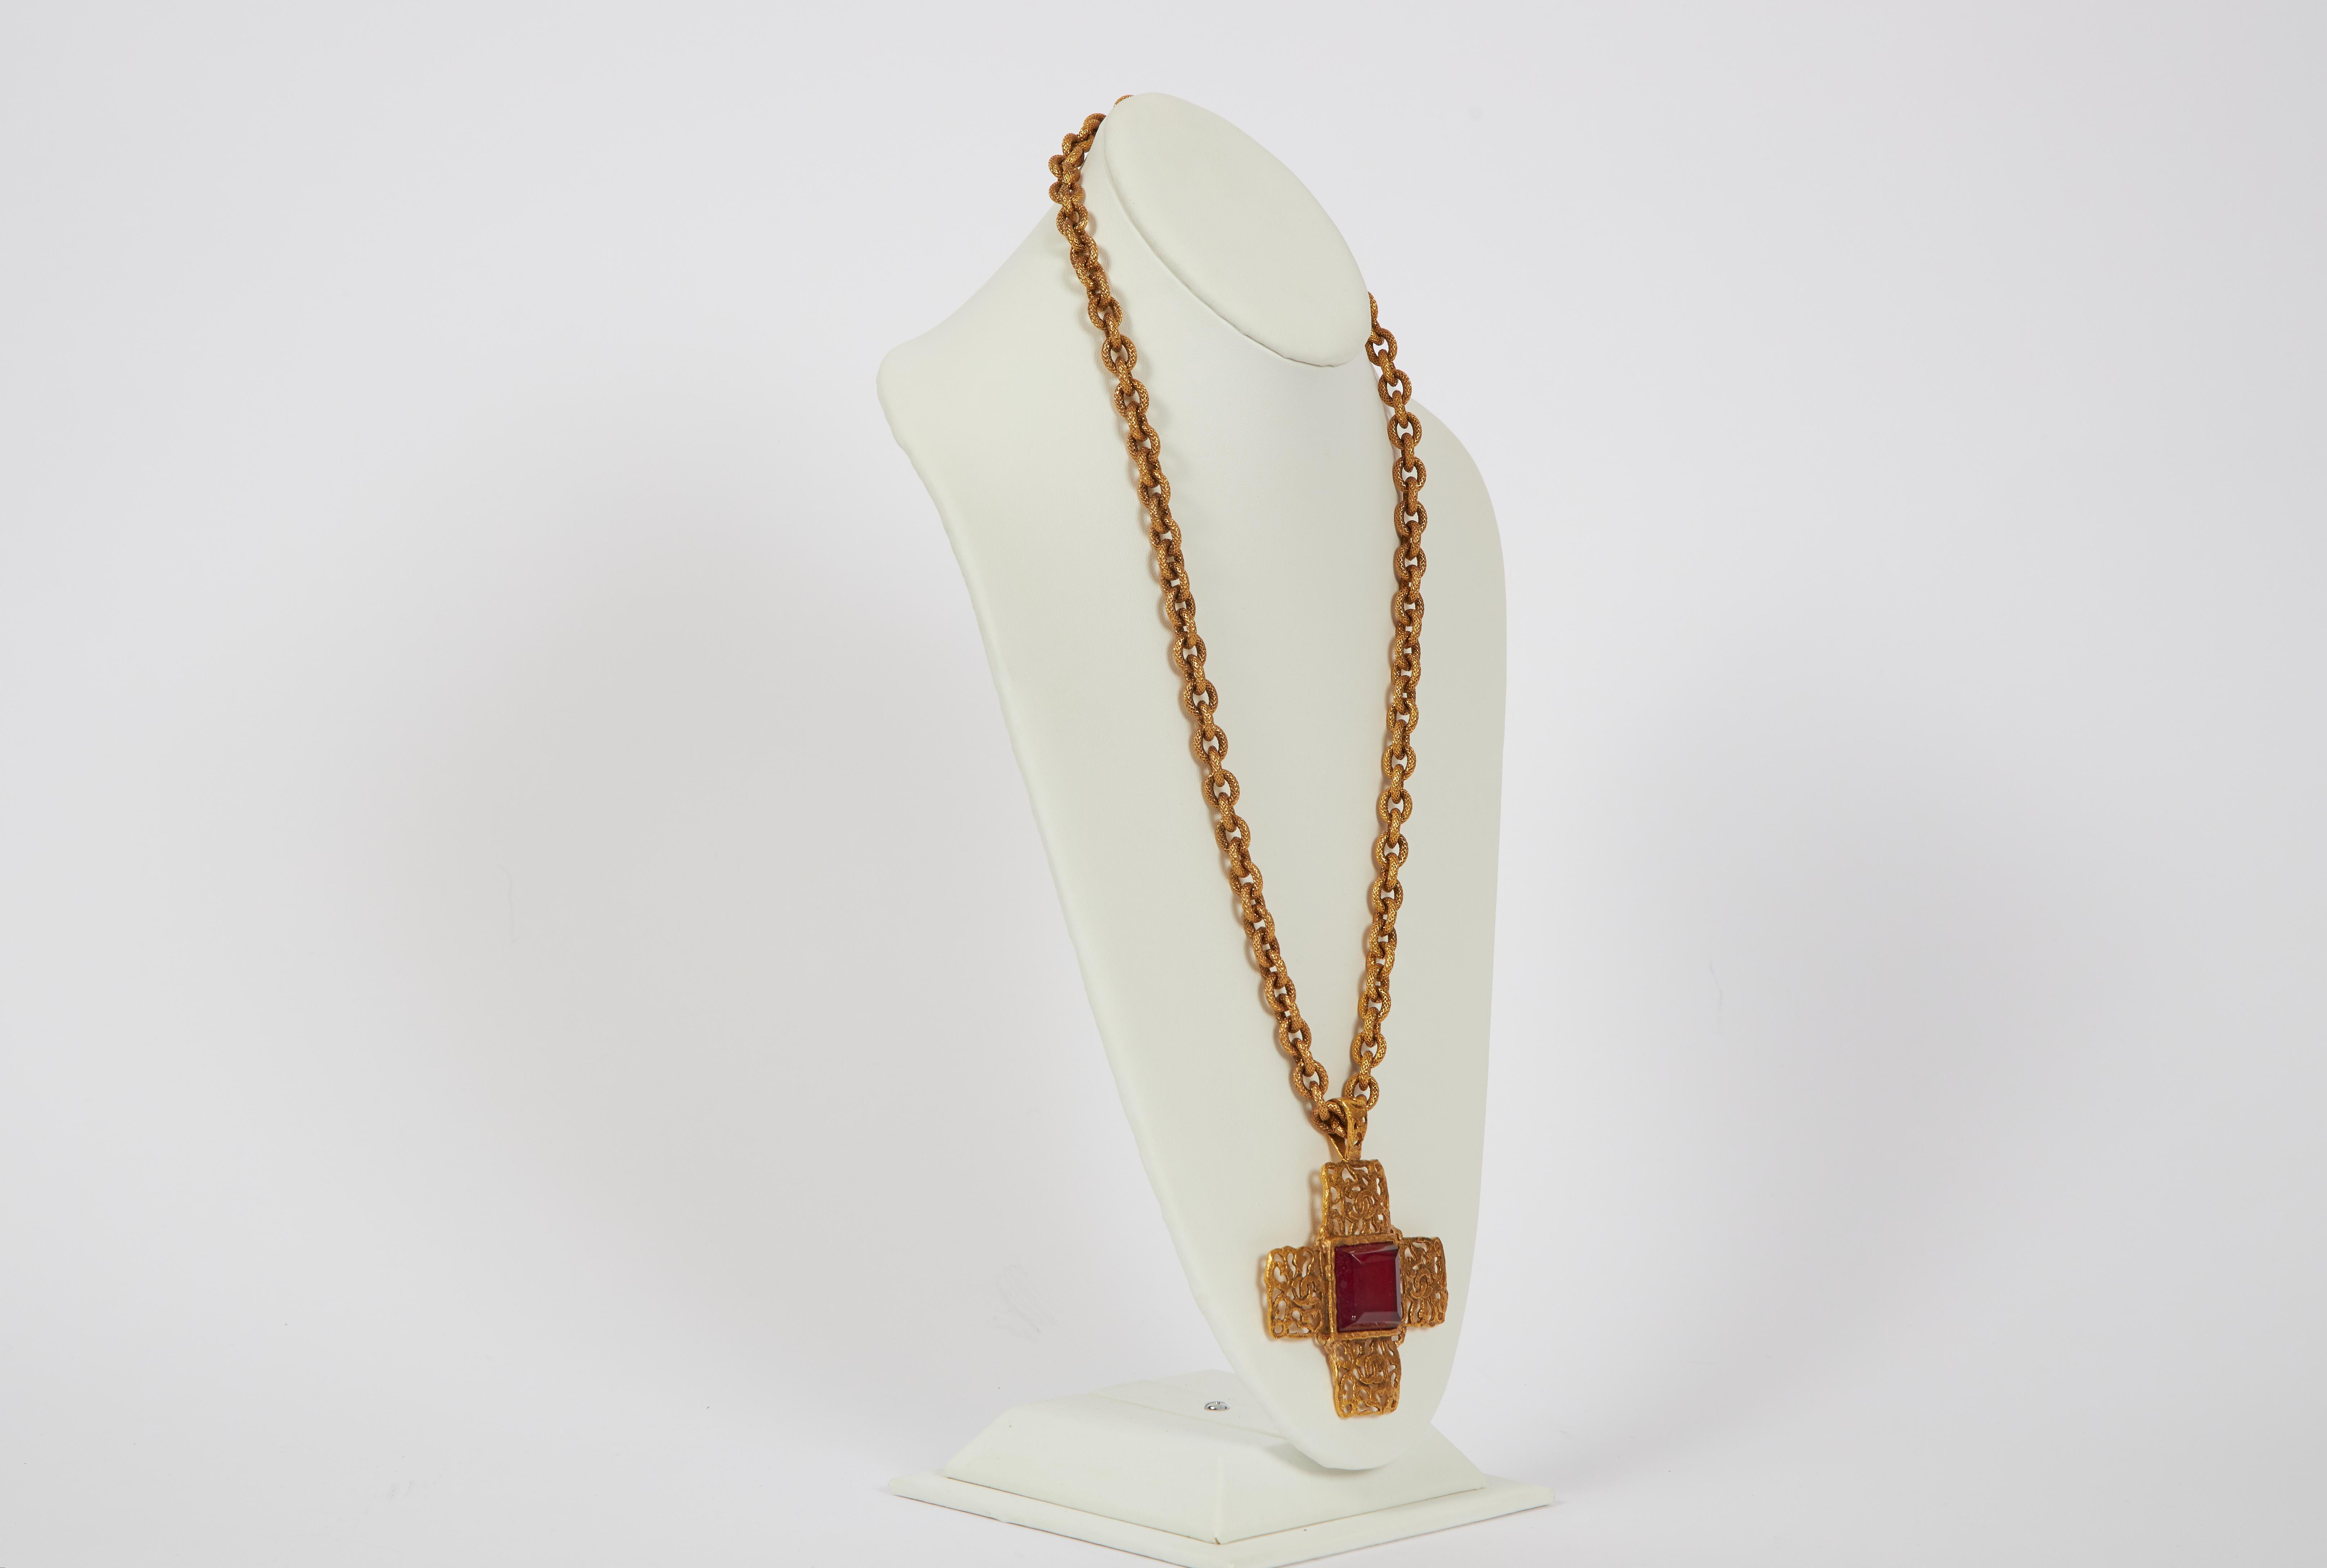 Chanel textured goldtone metal chain-link necklace featuring a cross pendant with a red gripoix center stone. Collection 25. Pendant, 3.5